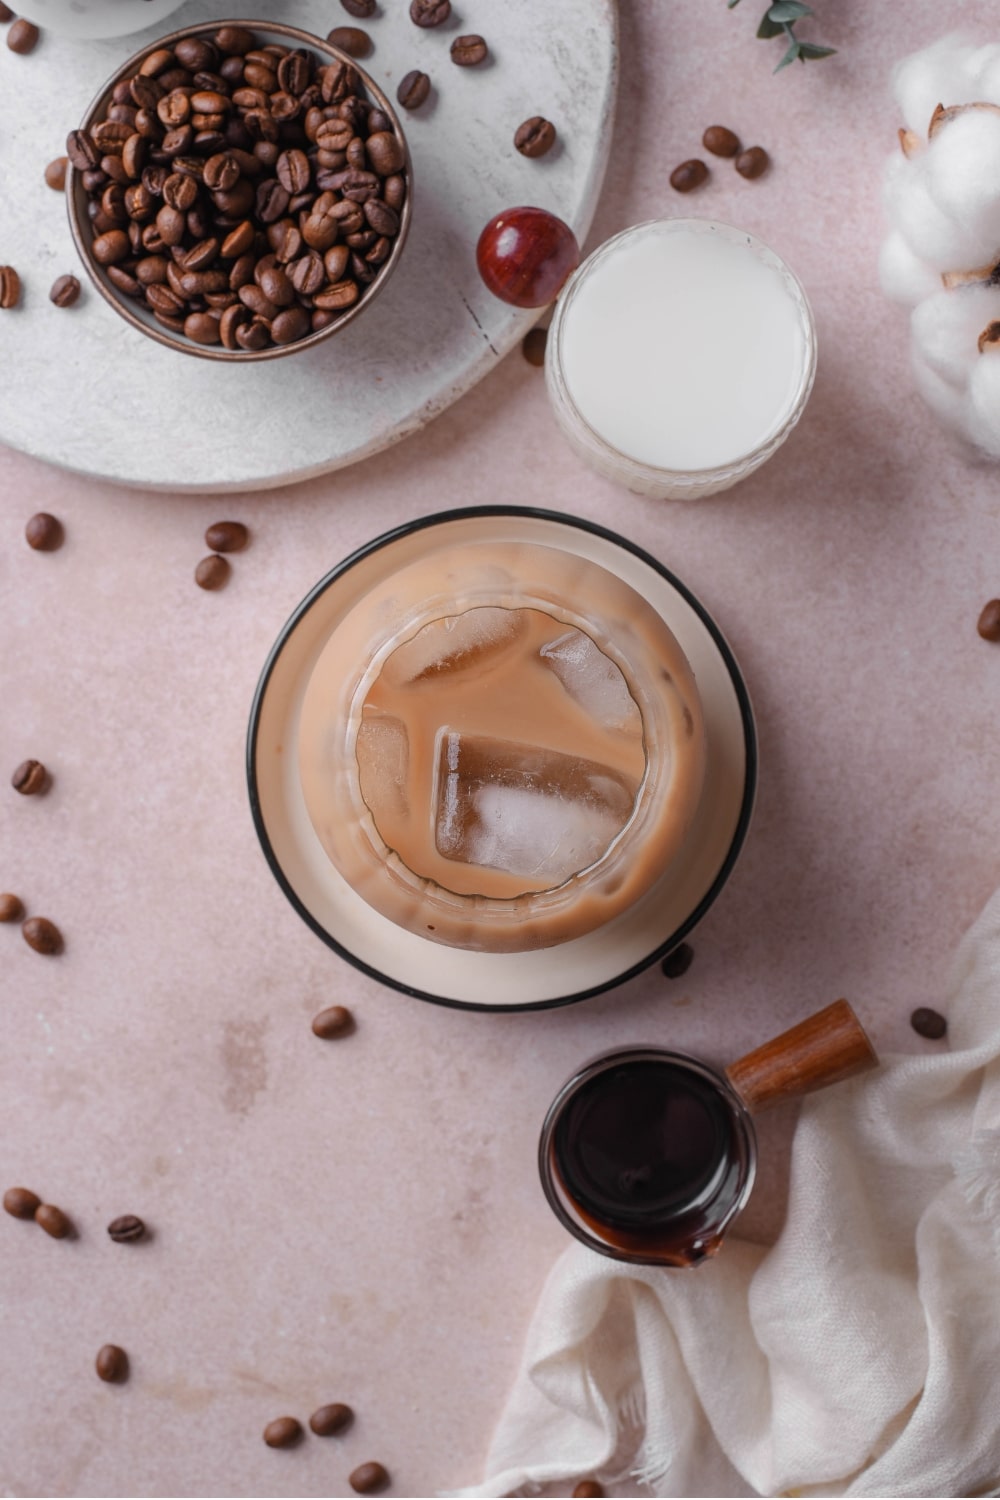 An overhead shot of a glass of low calorie iced coffee. The glass is filled with ice cubes and iced coffee, with a saucer of milk and serving of chocolate sauce next to the glass.